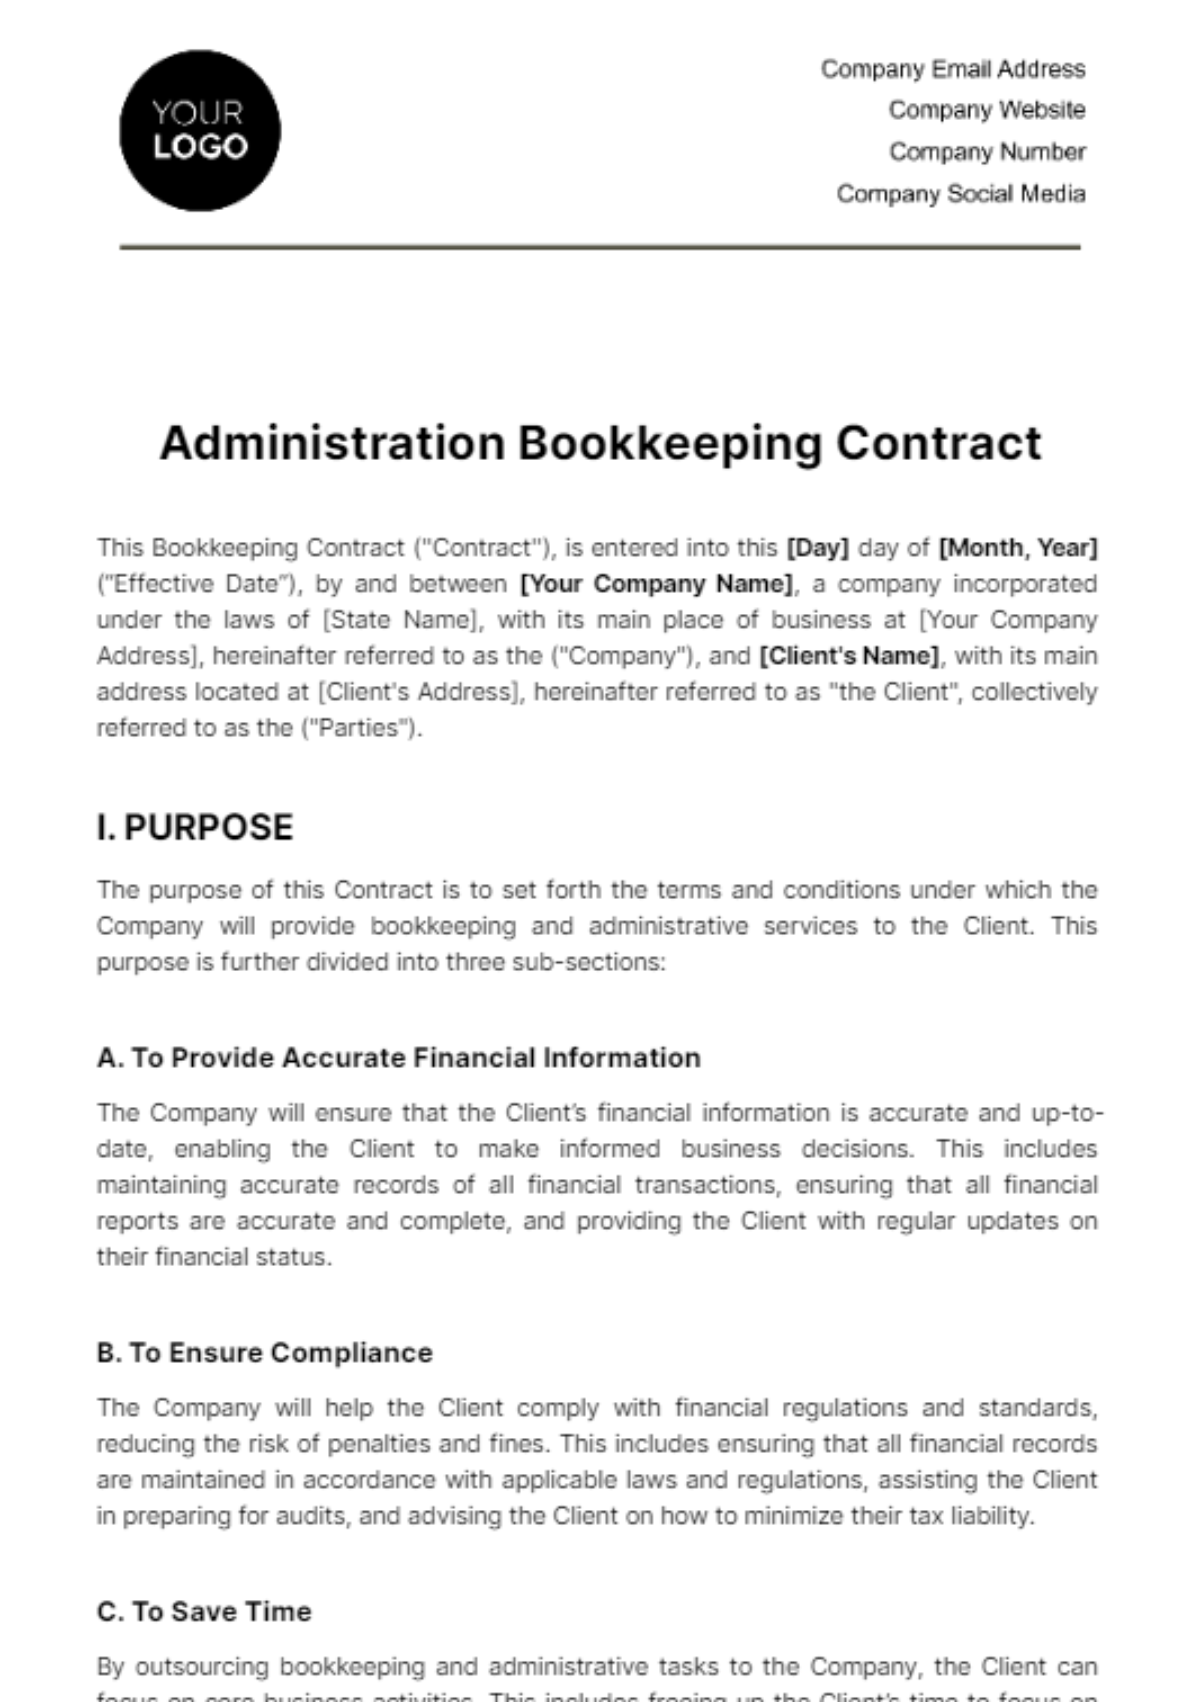 Administration Bookkeeping Contract Template